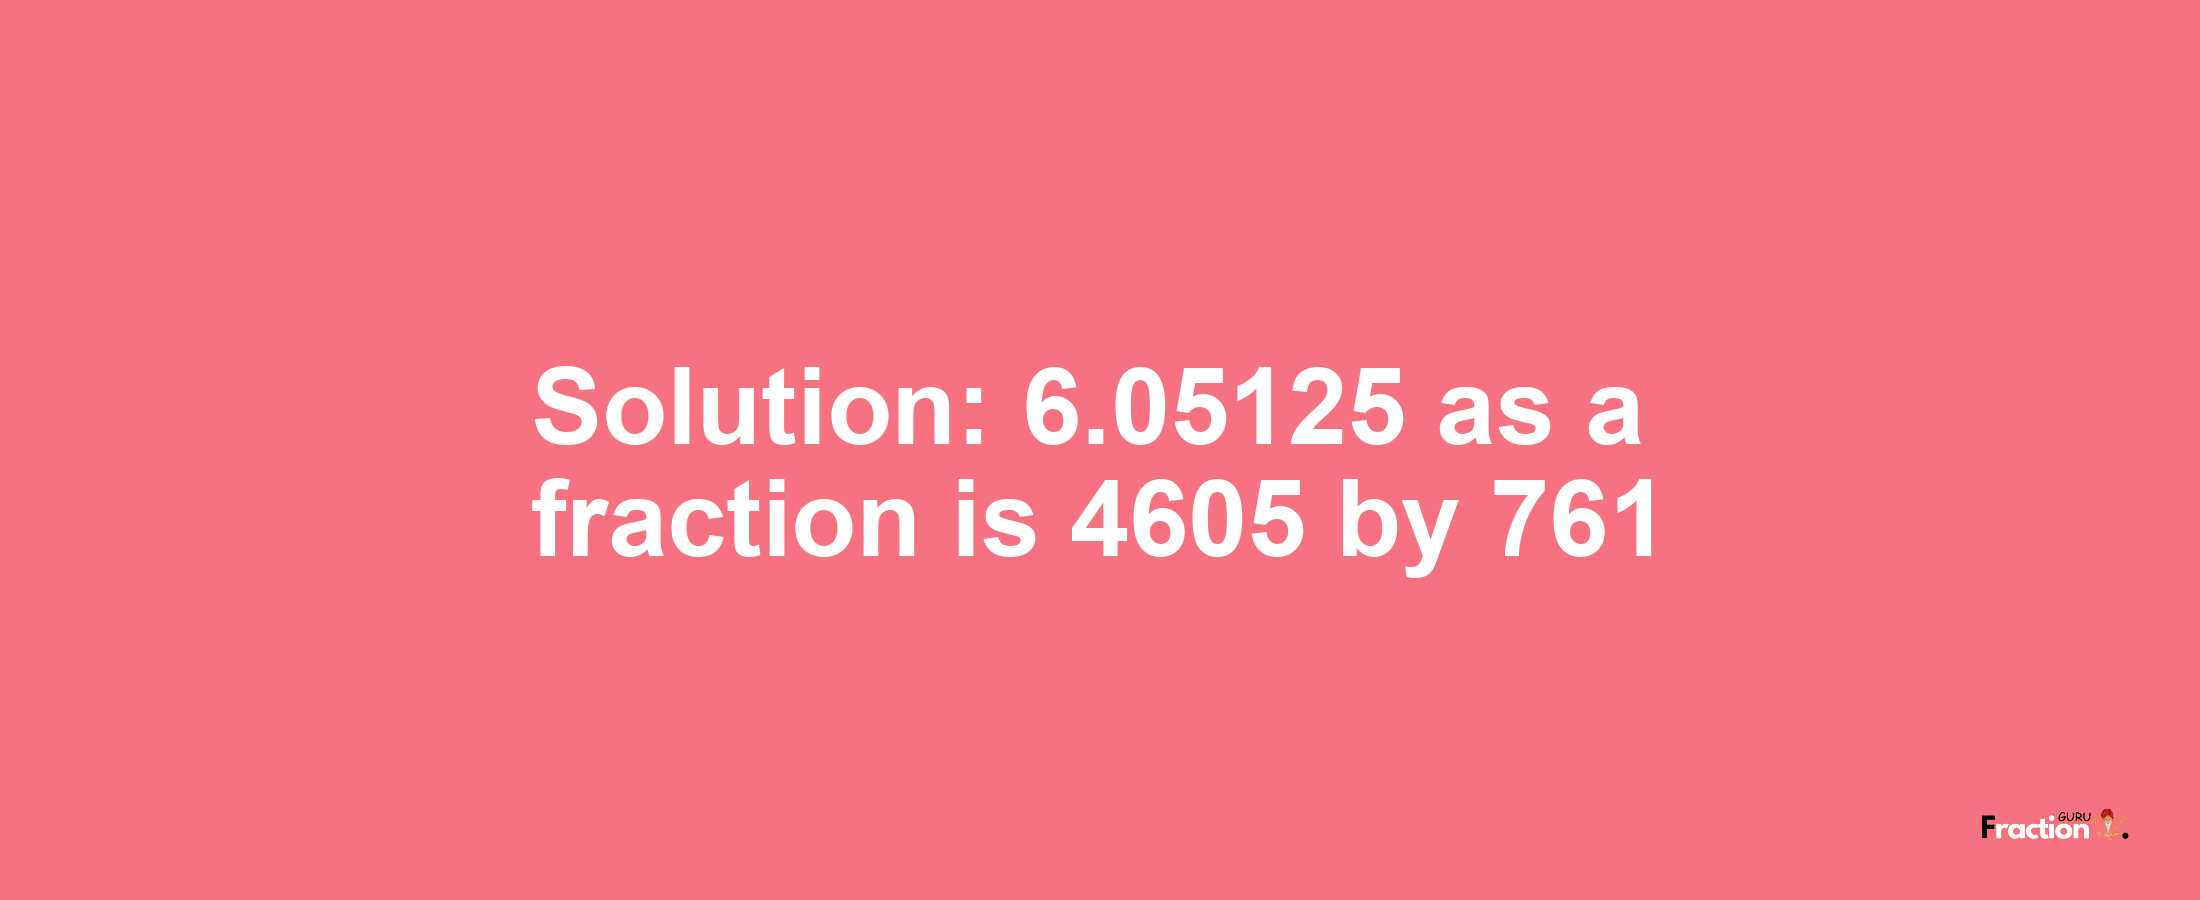 Solution:6.05125 as a fraction is 4605/761